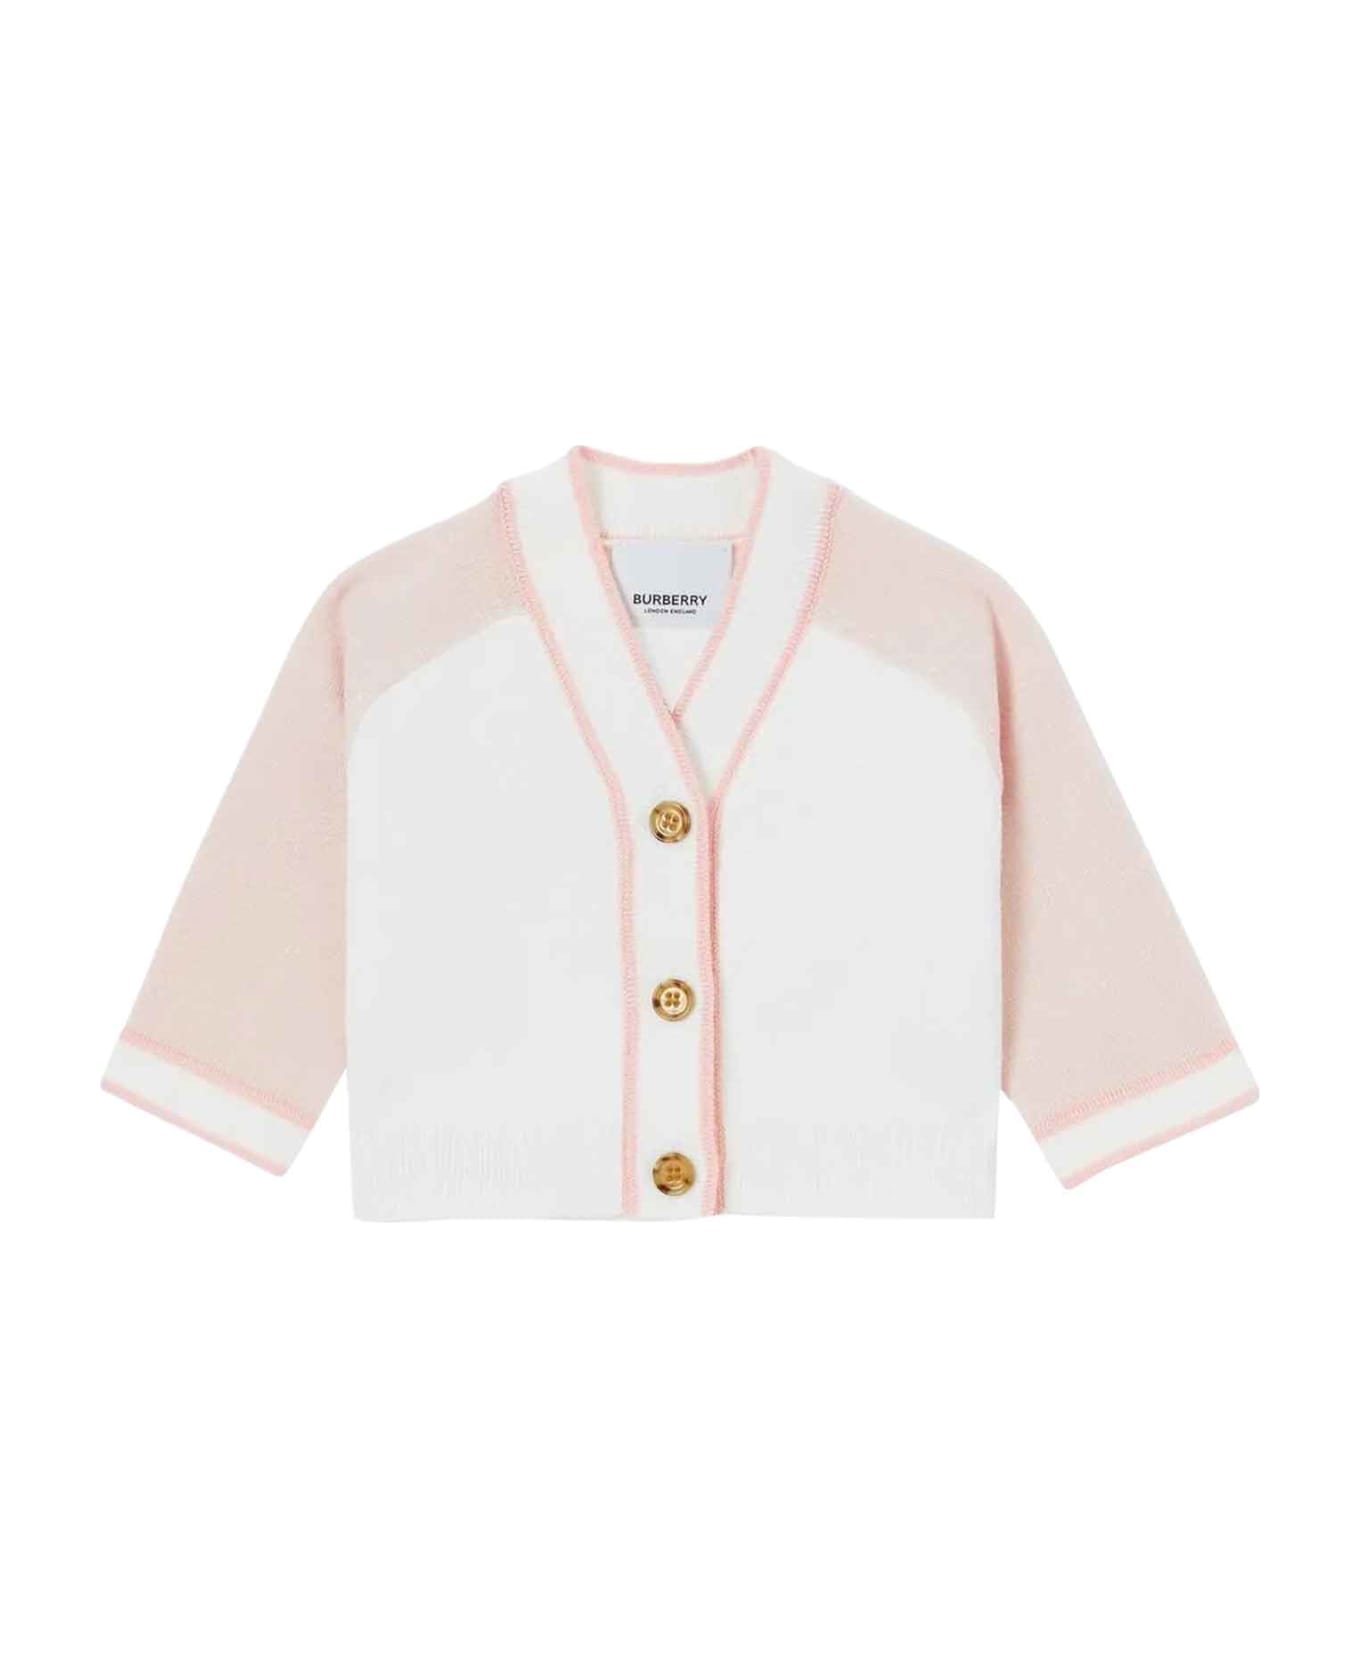 Burberry Pink Set Baby Girl - Rosa ボディスーツ＆セットアップ